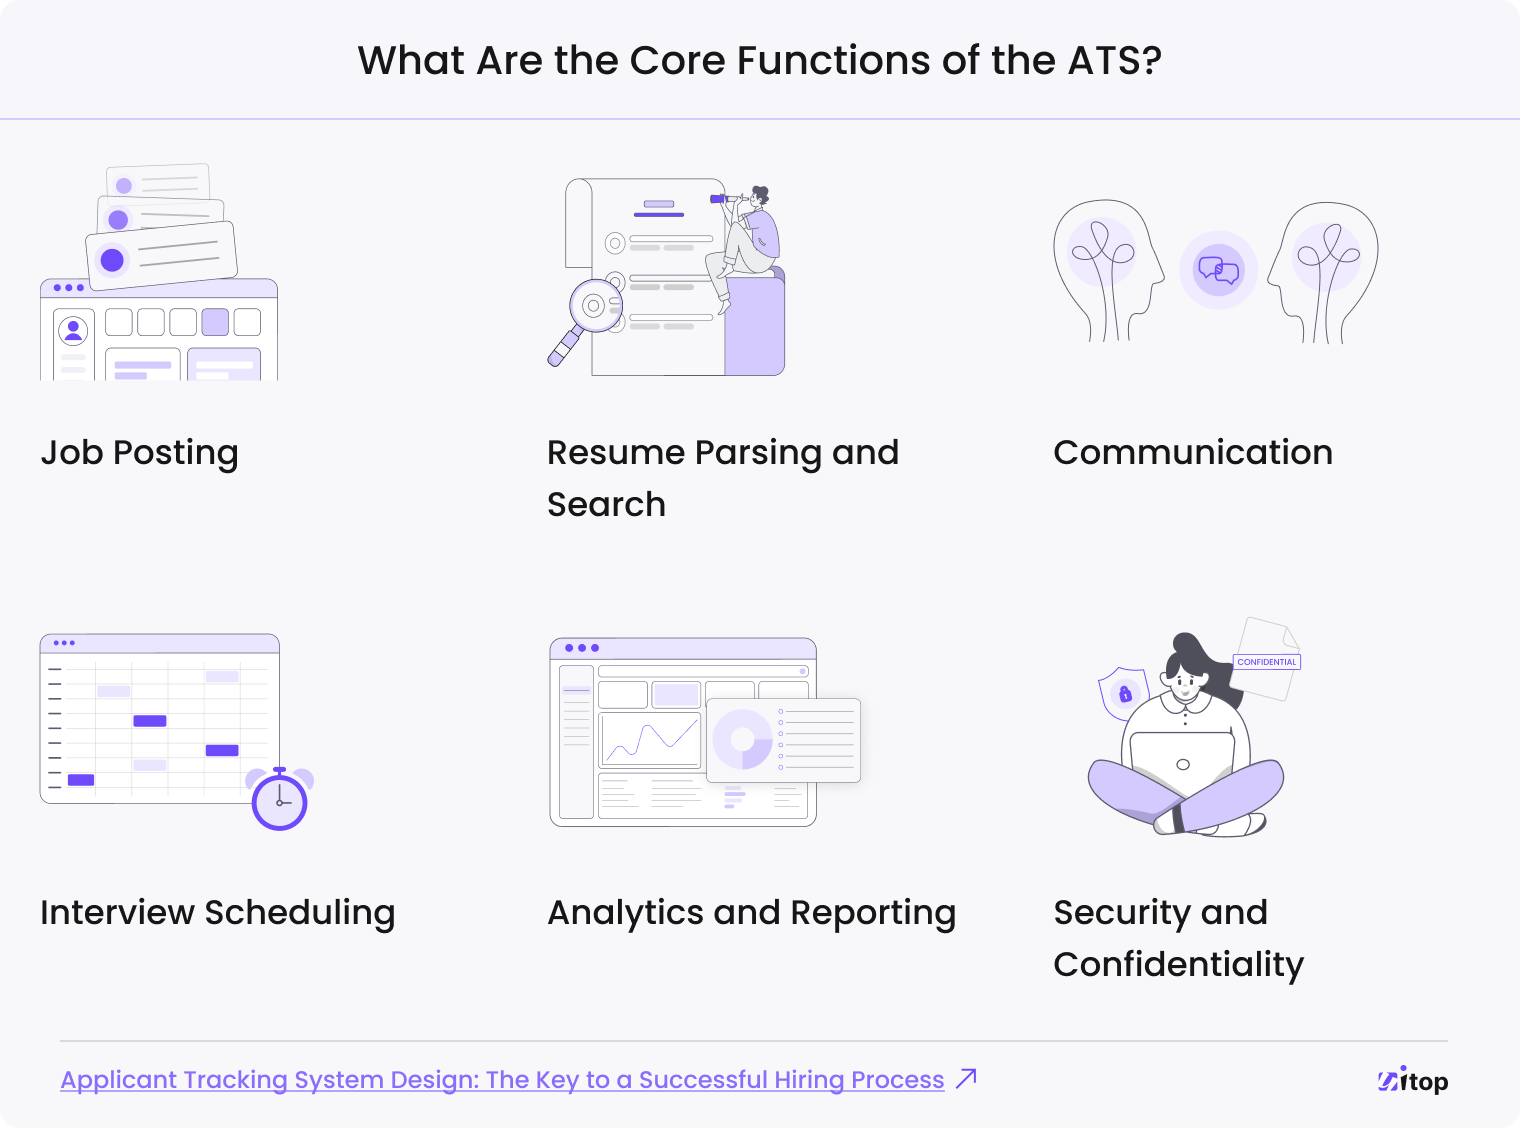 Core Functions of the ATS